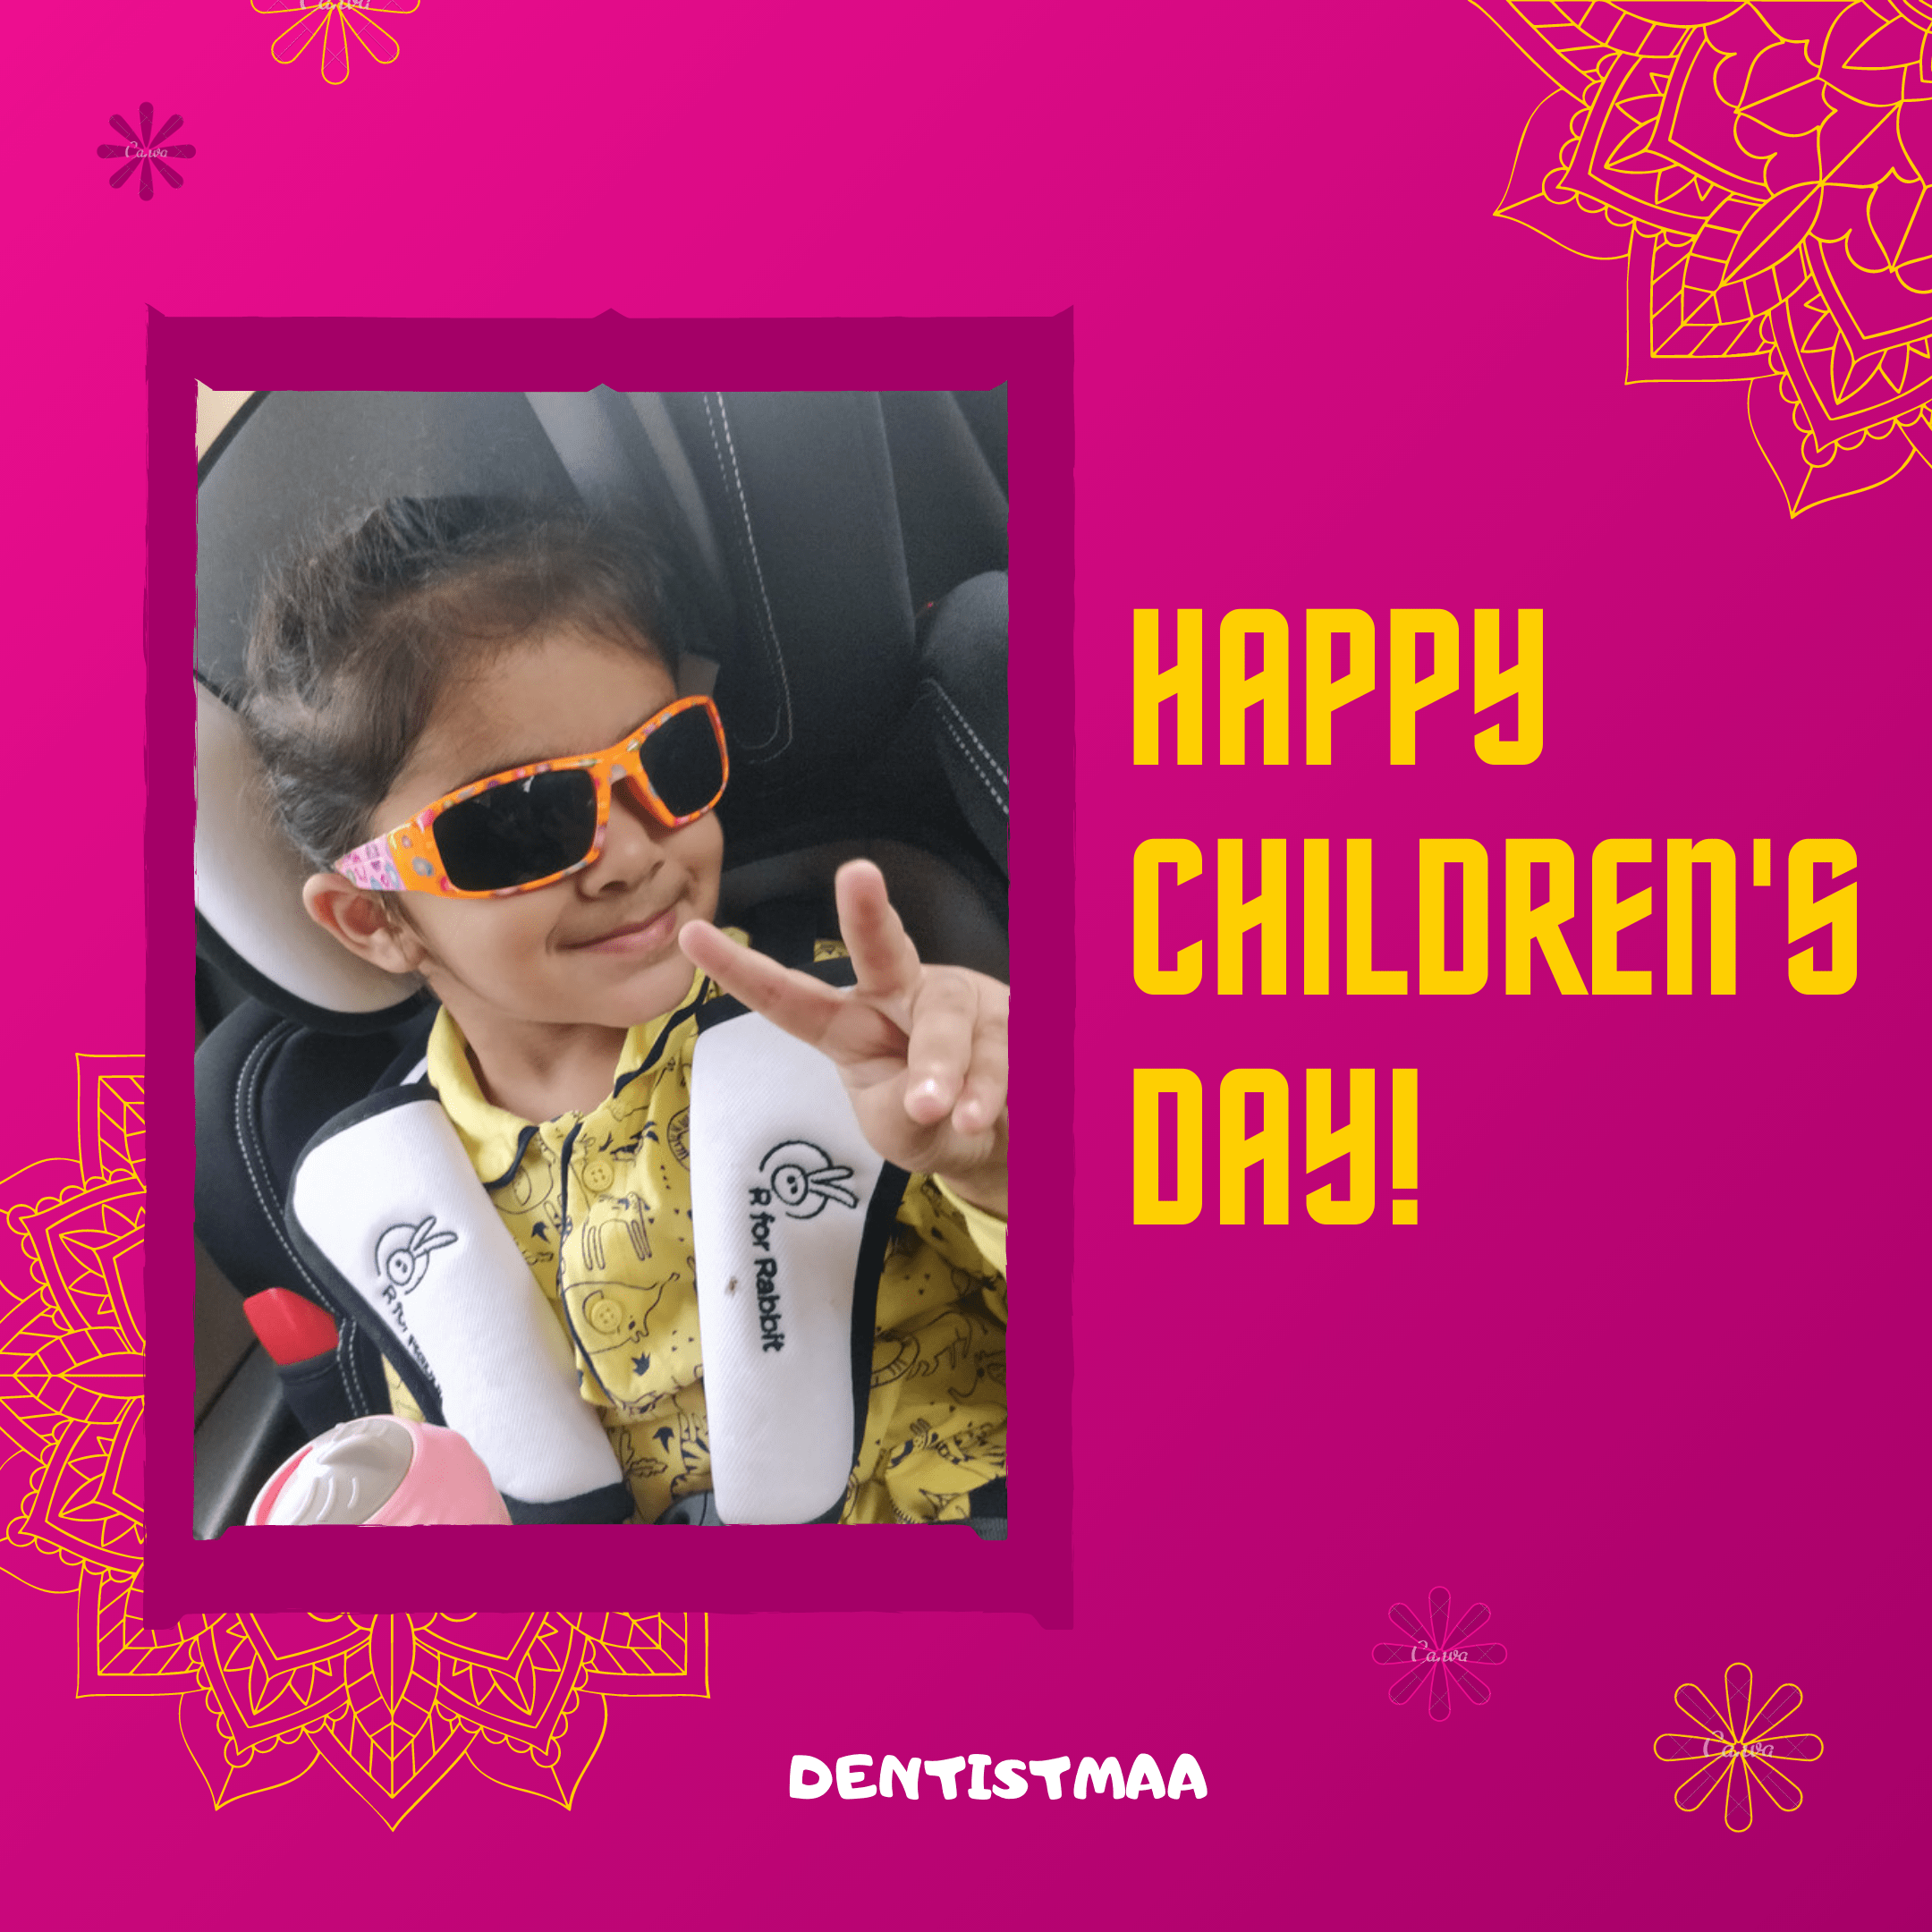 Wishing all the kids out there a very Happy Children's Day!